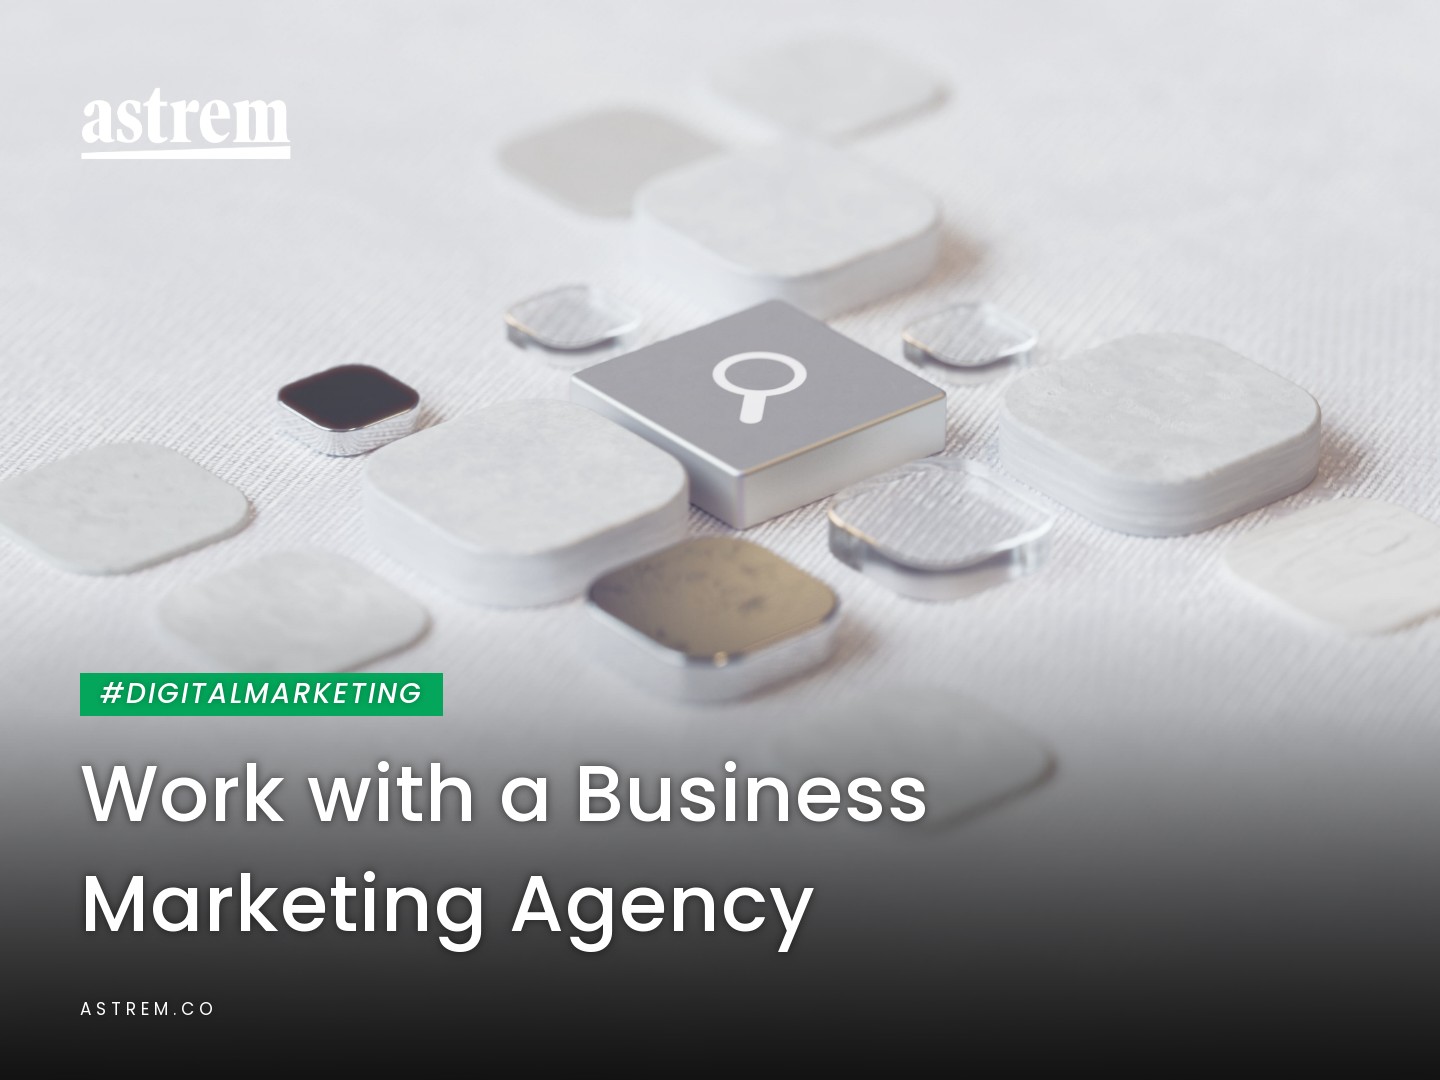 Work with a Business Marketing Agency Image